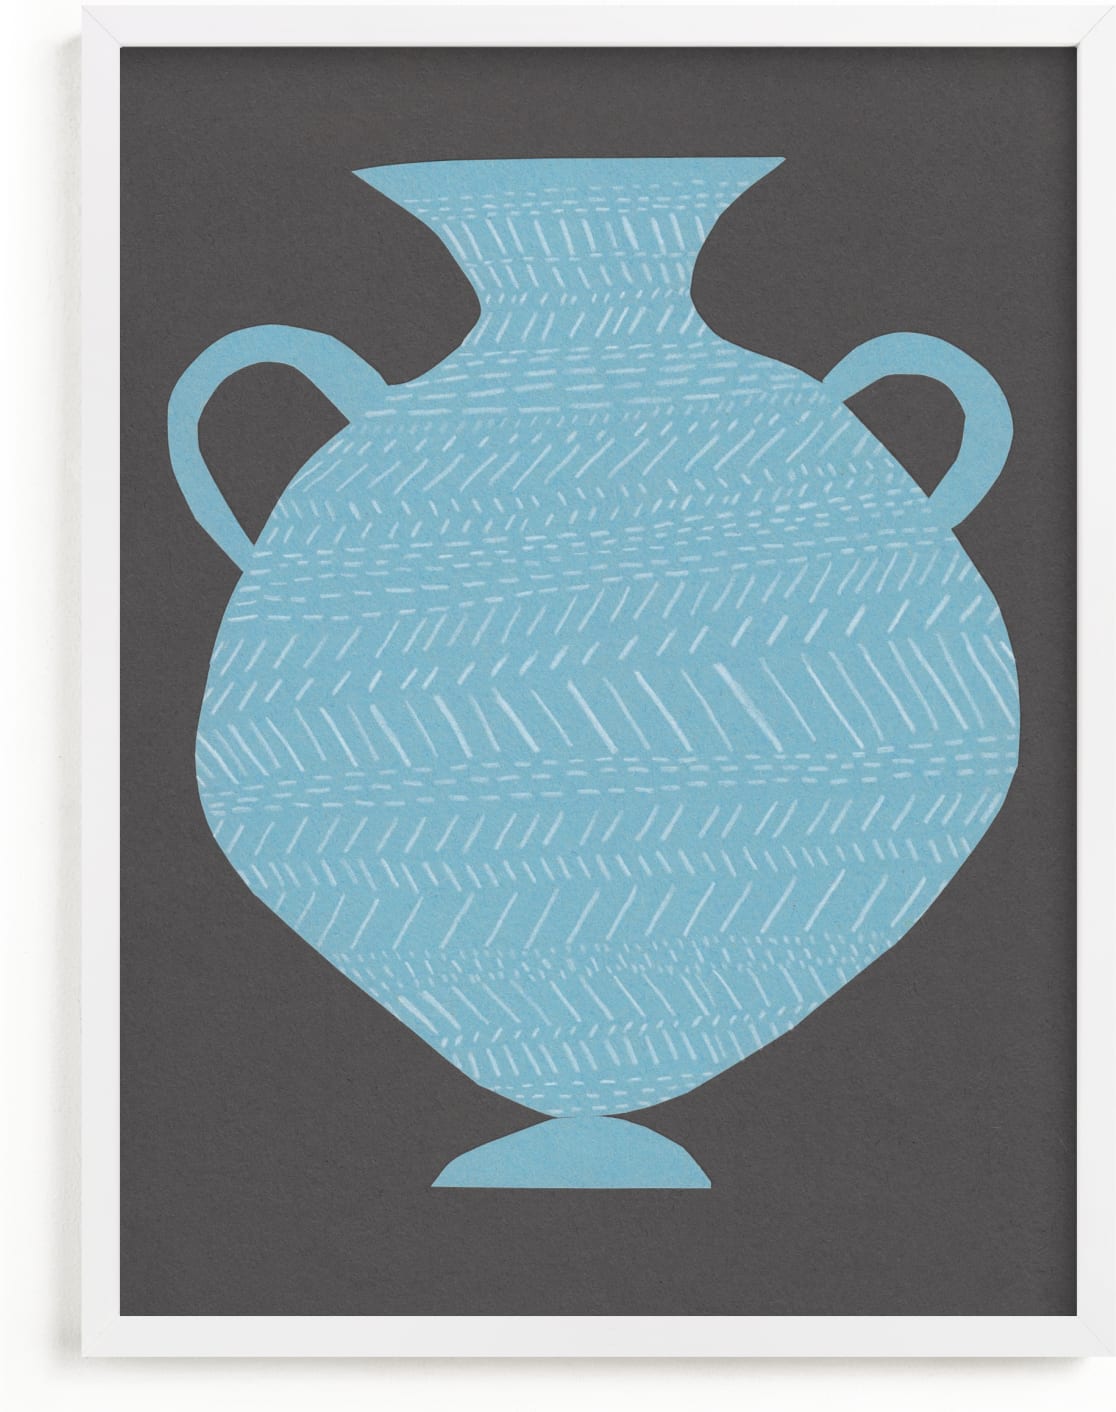 This is a blue art by Elliot Stokes called Amphora (blue).